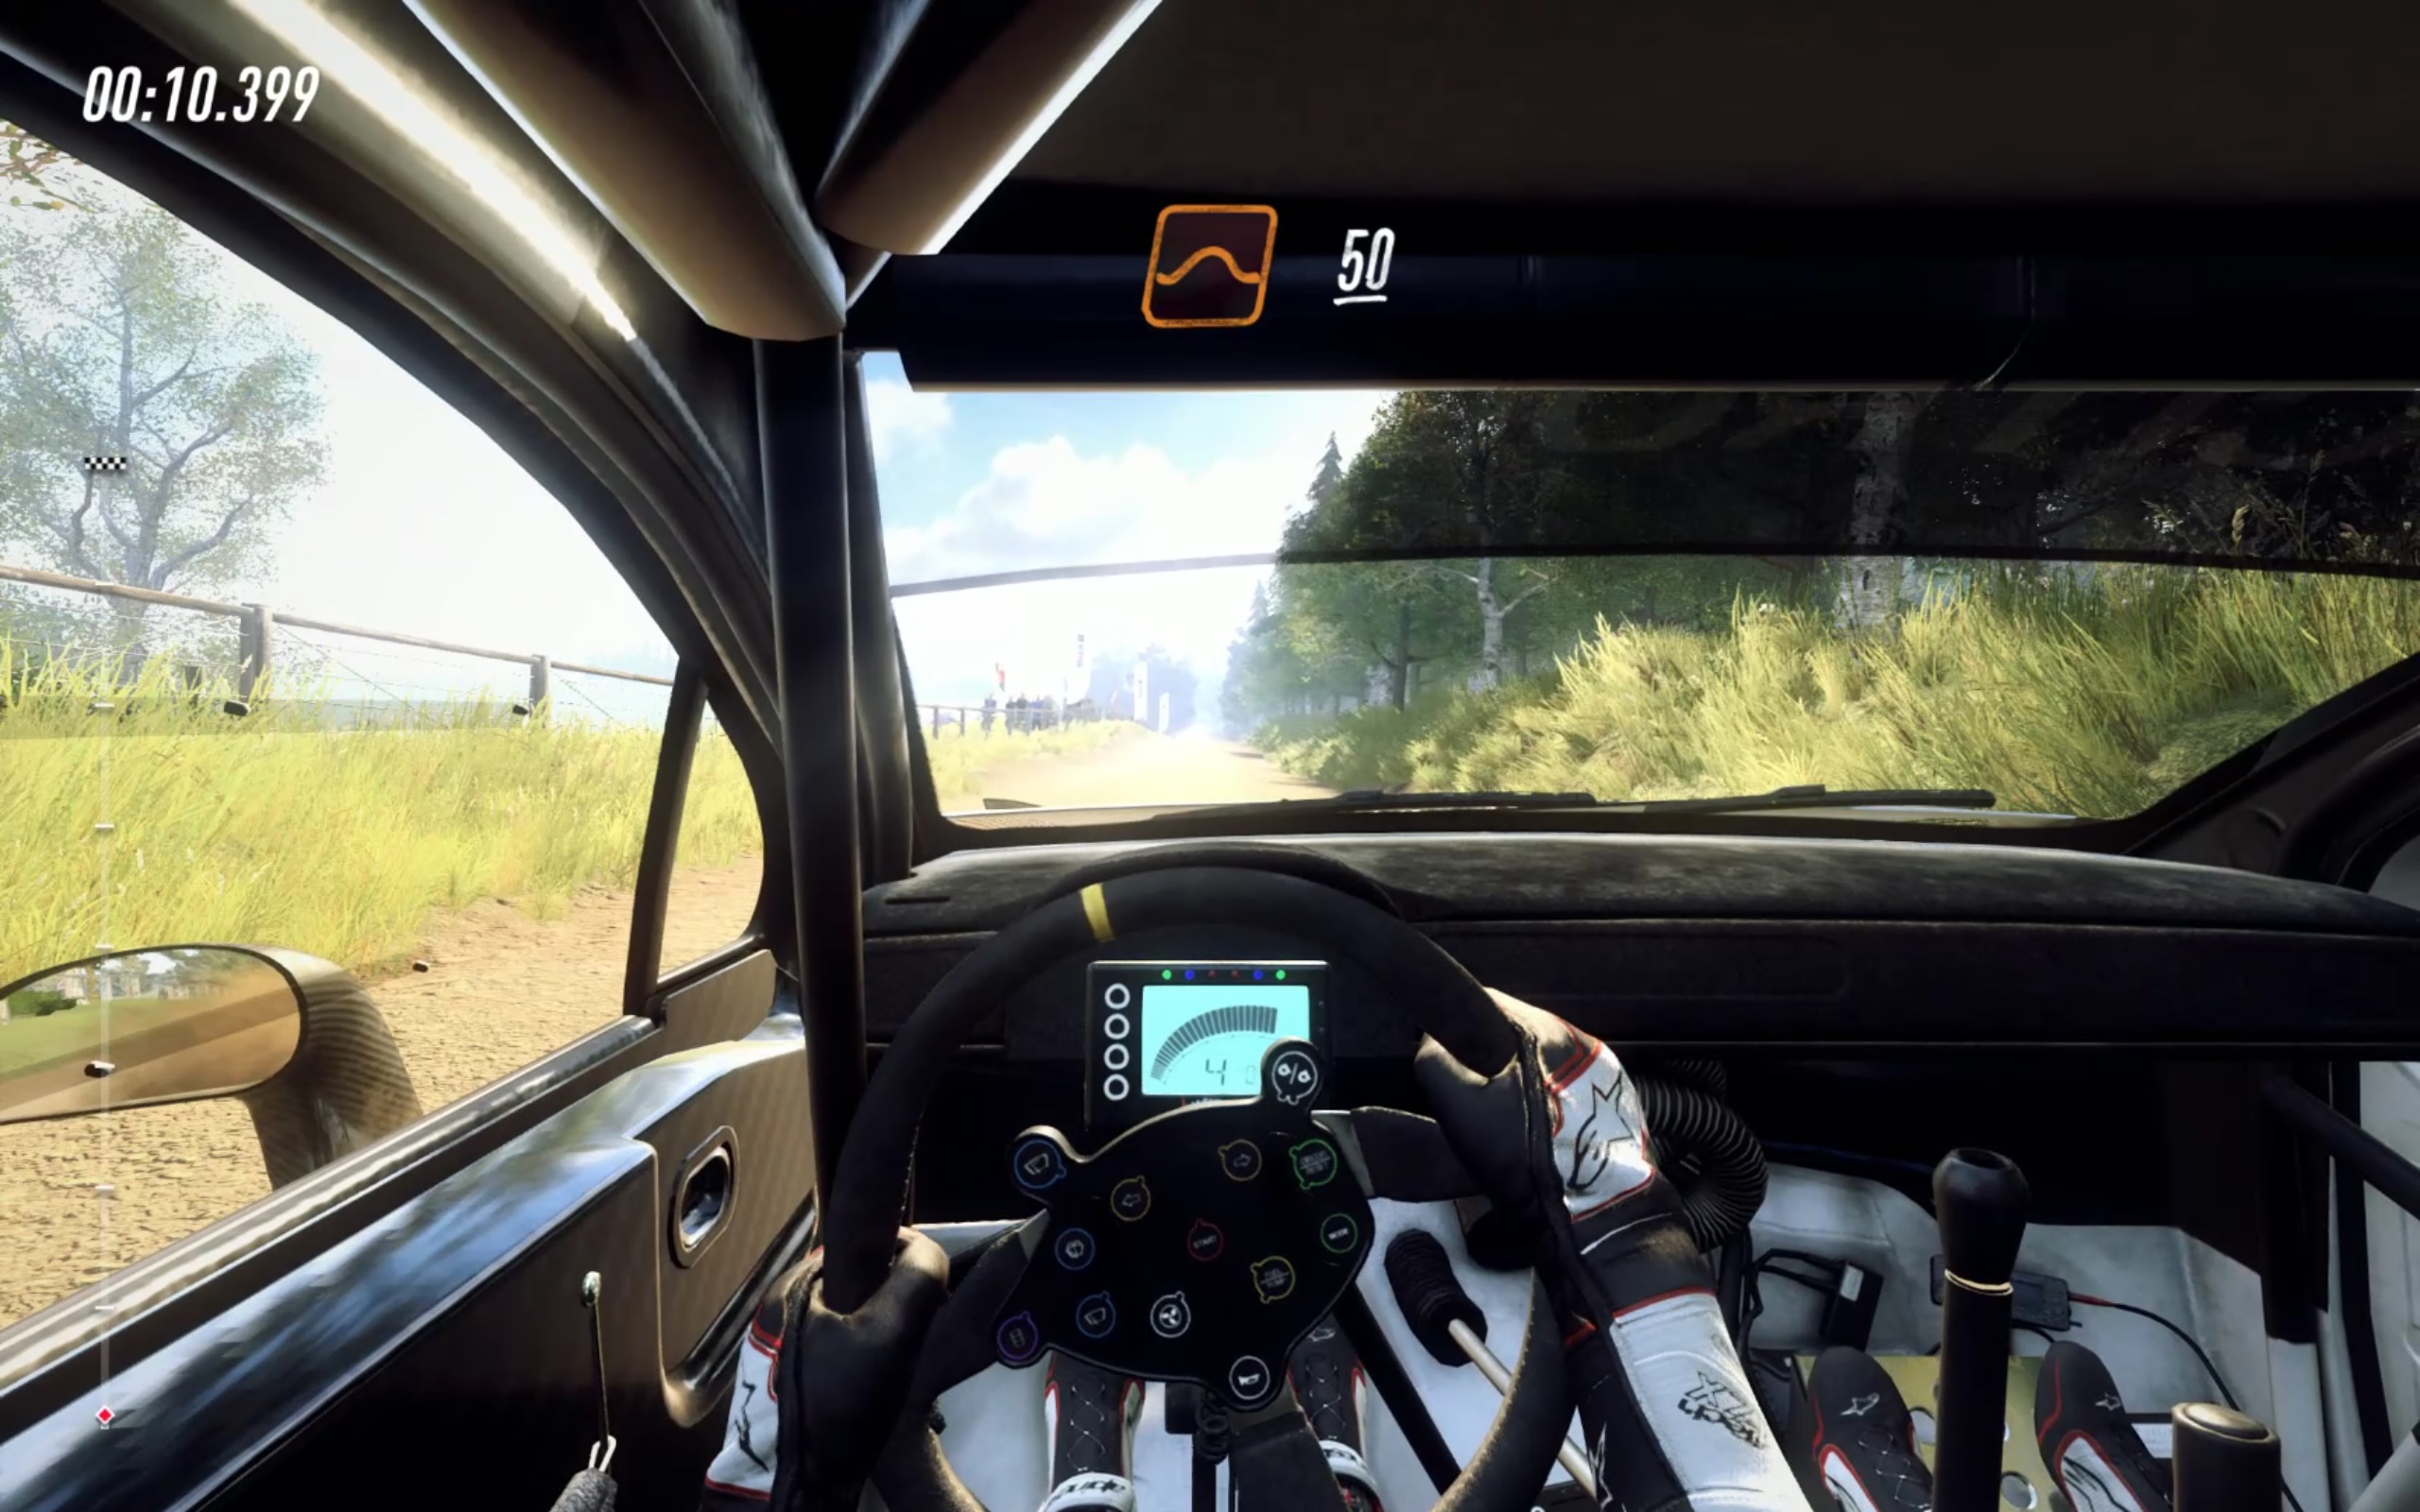 project cars vs dirt rally